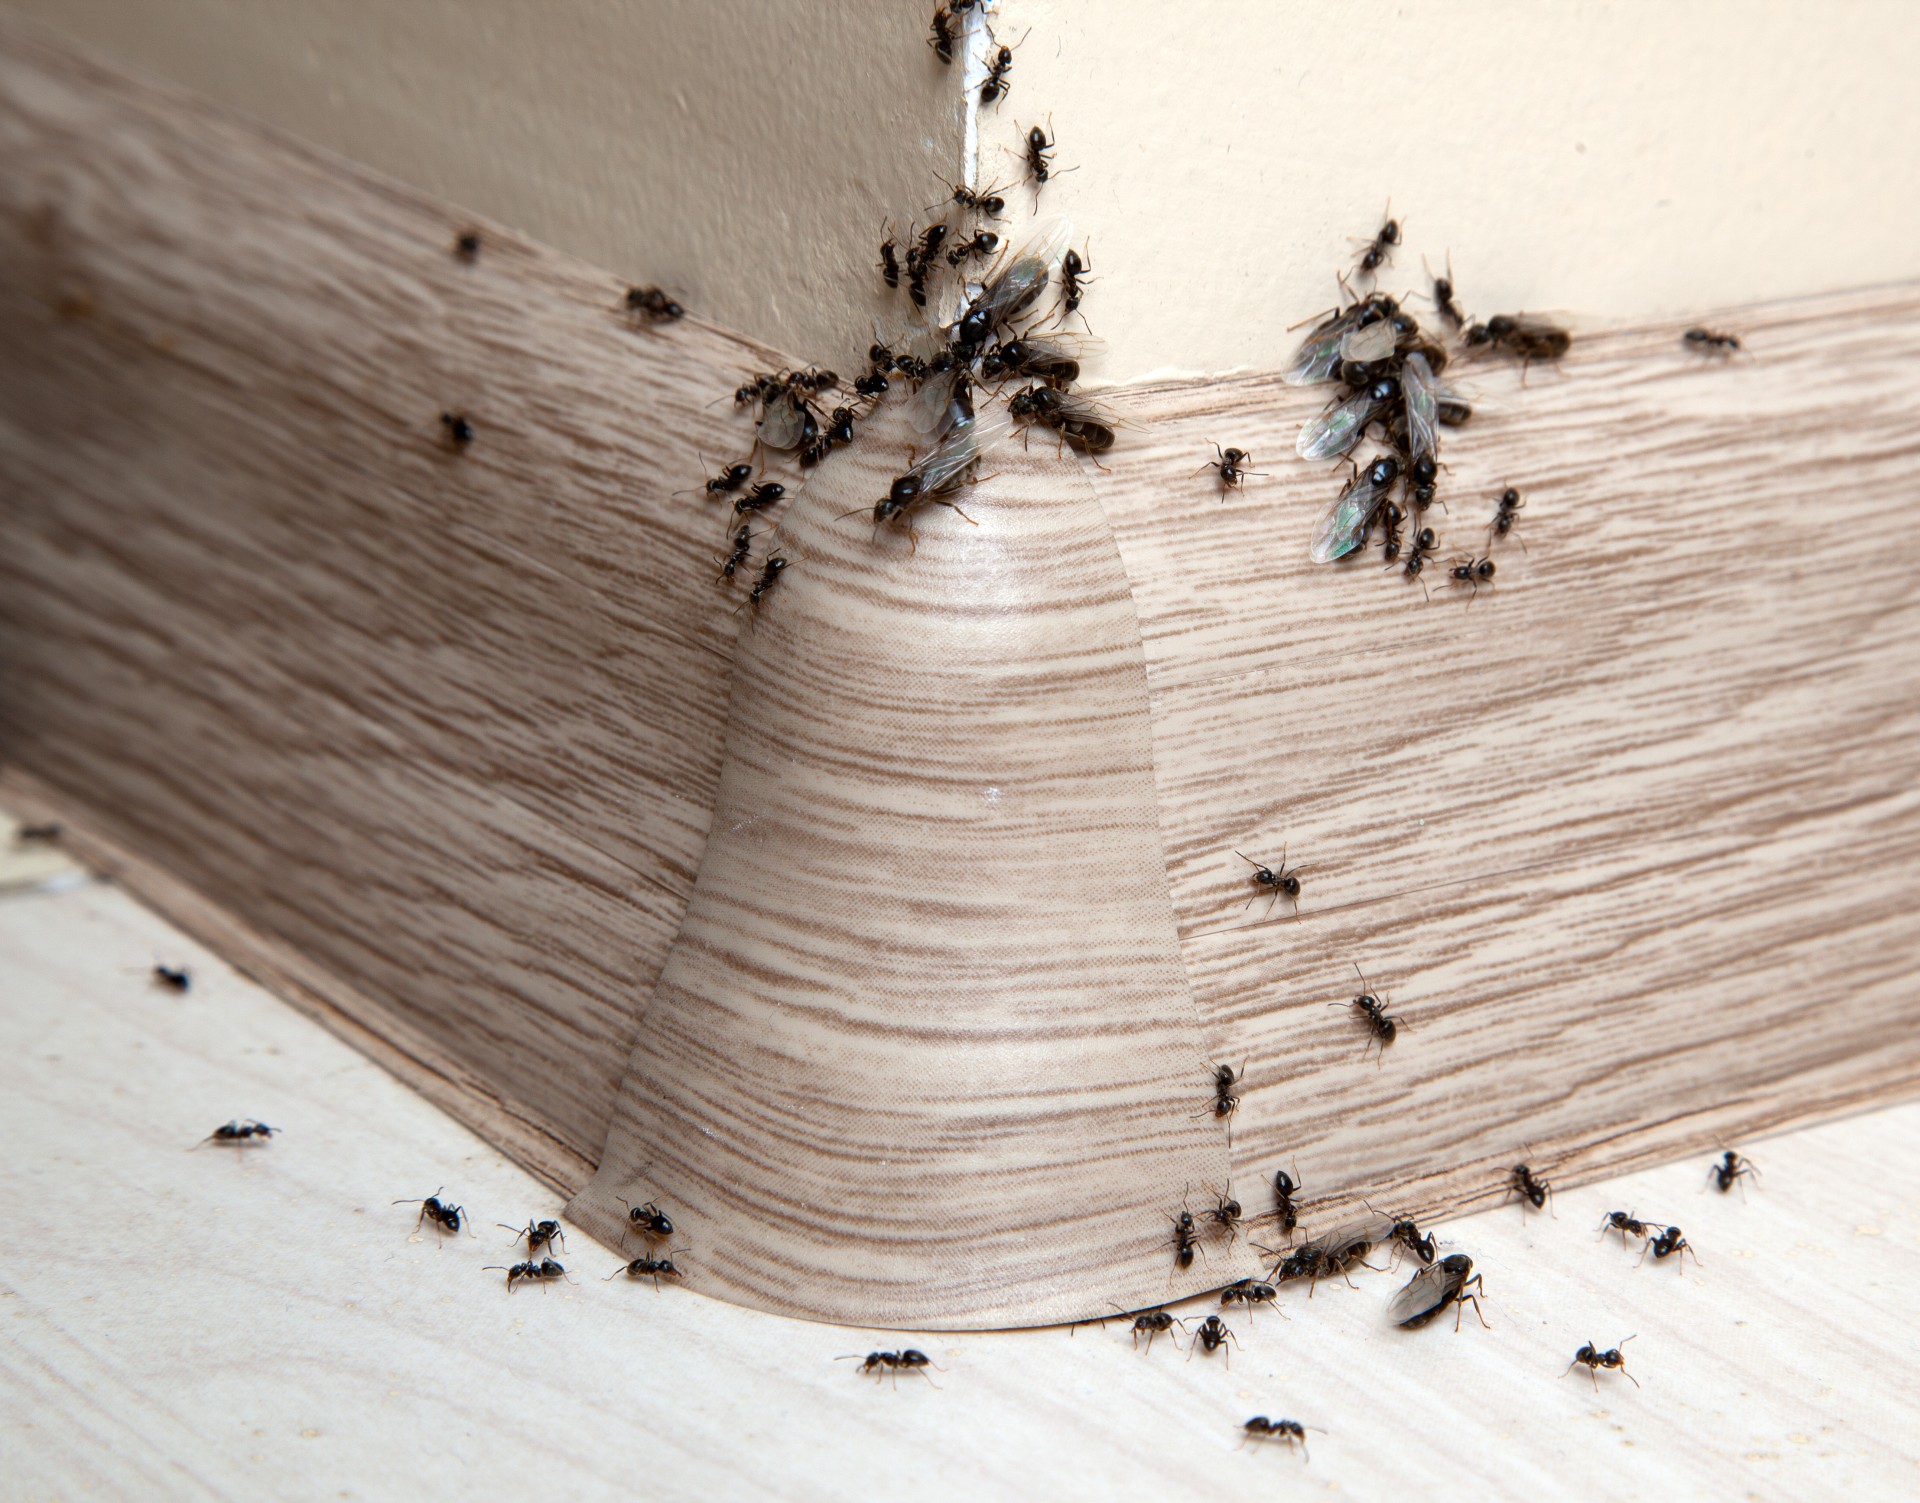 Ant Infestation, Pest Control in Sutton, Rose Hill, SM1. Call Now 020 8166 9746